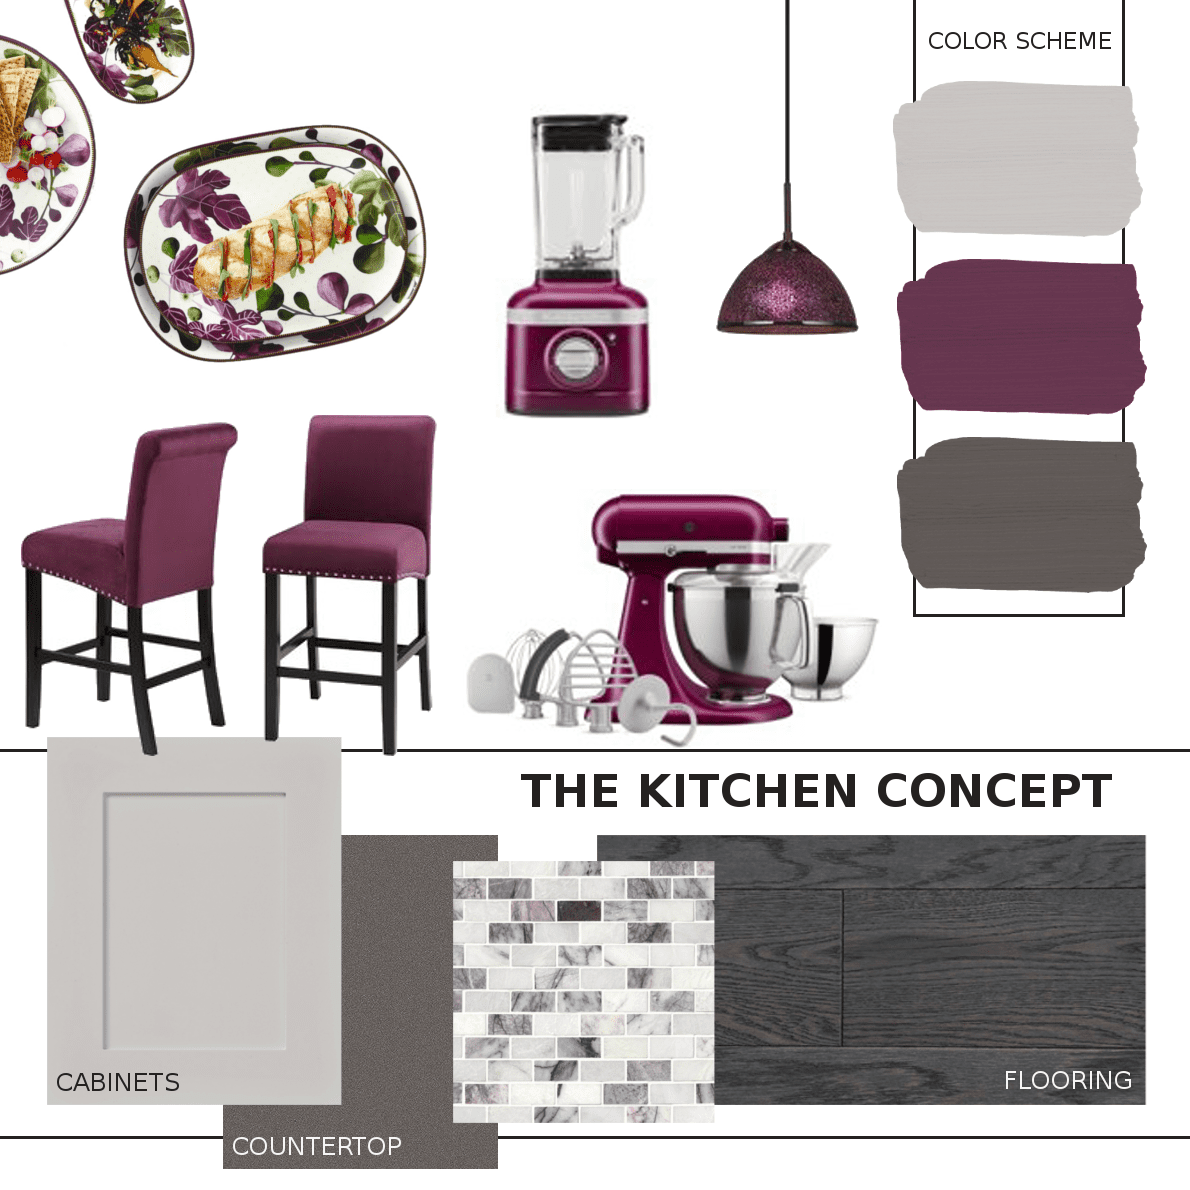 I can't decide on a color, beetroot or pistachio? : r/Kitchenaid